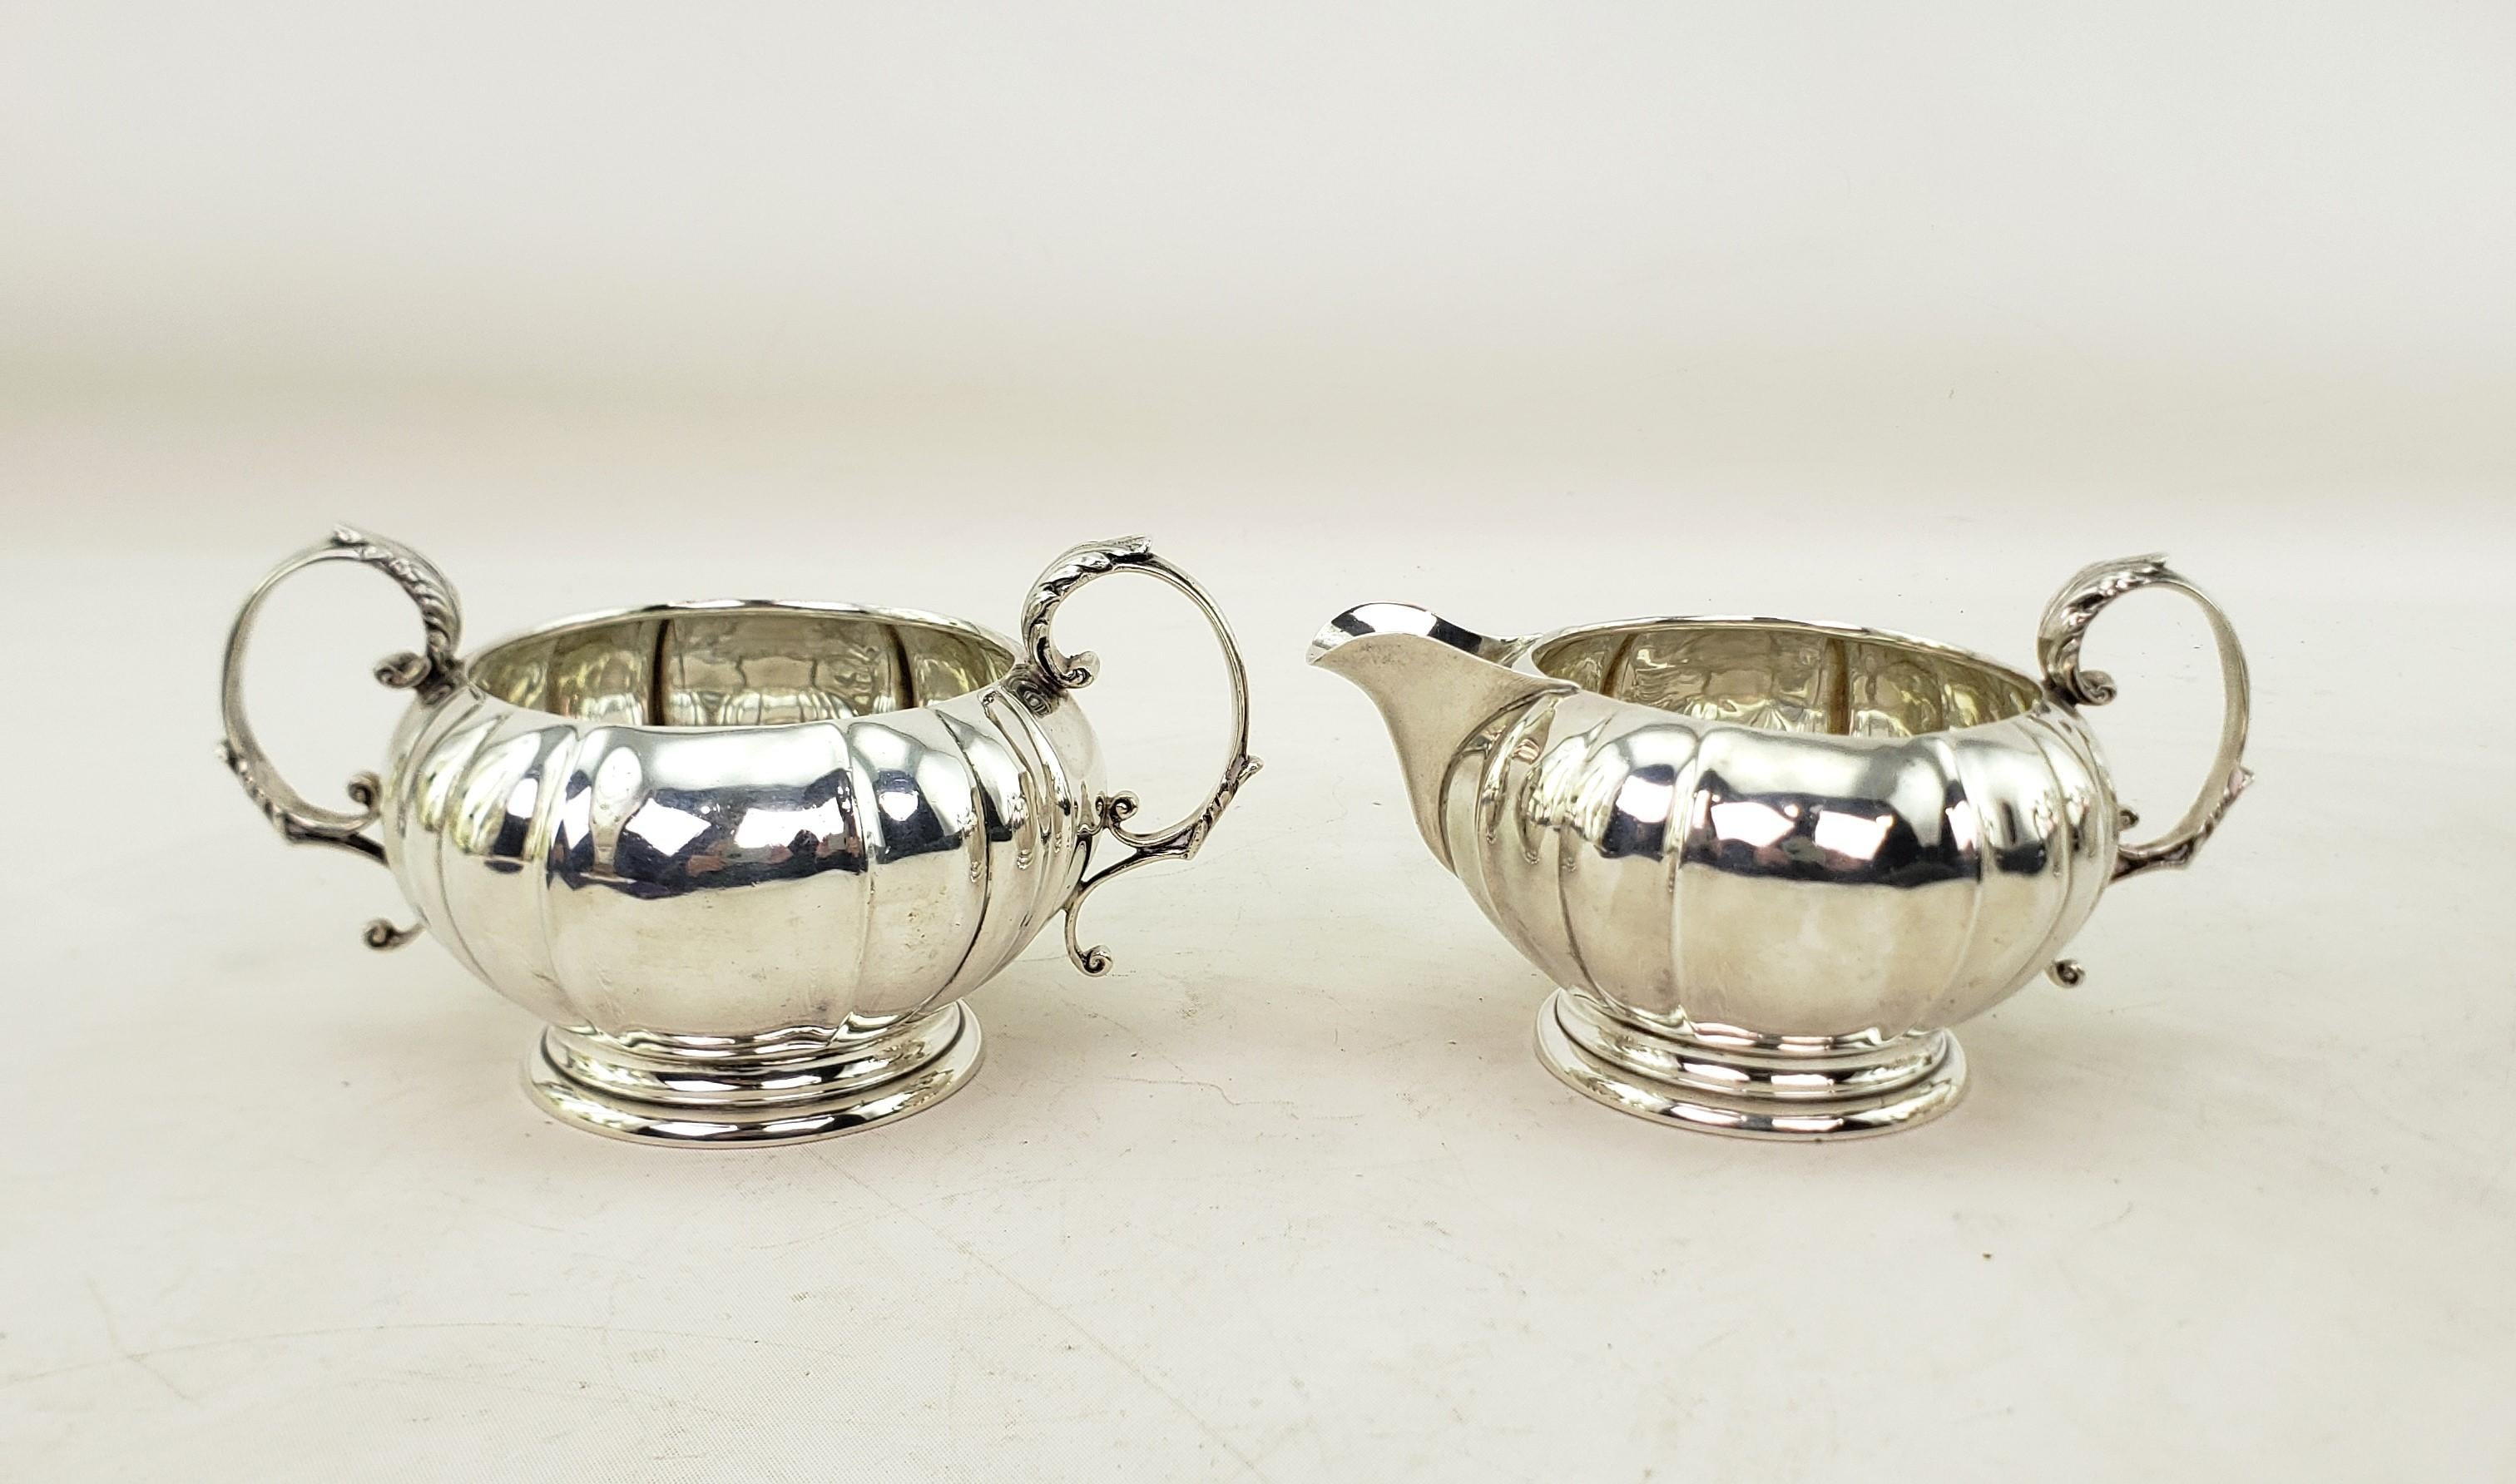 Antique Birks Sterling Silver Tea or Coffee Set with Creamer & Sugar Bowl For Sale 7